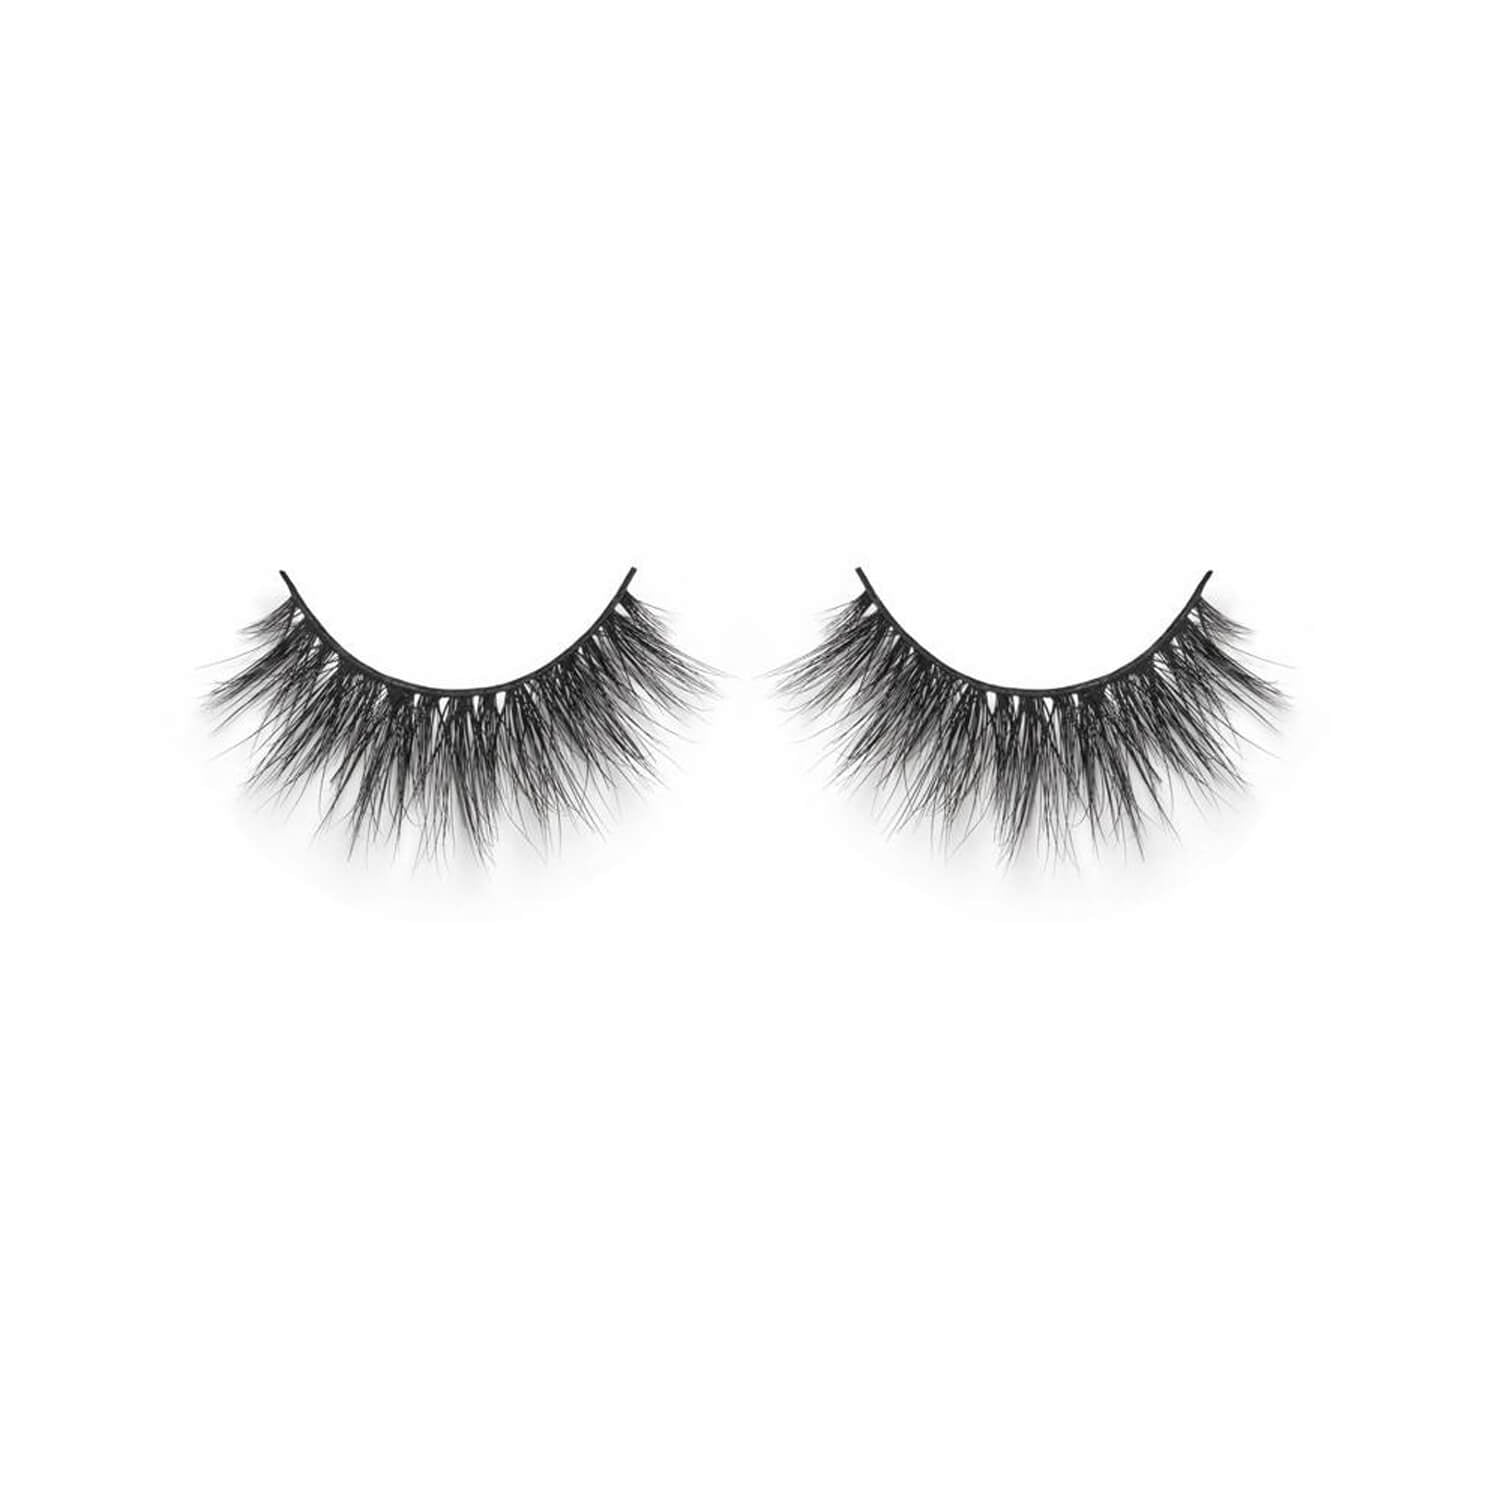 Lilly Lashes Miami 3D Mink Lashes